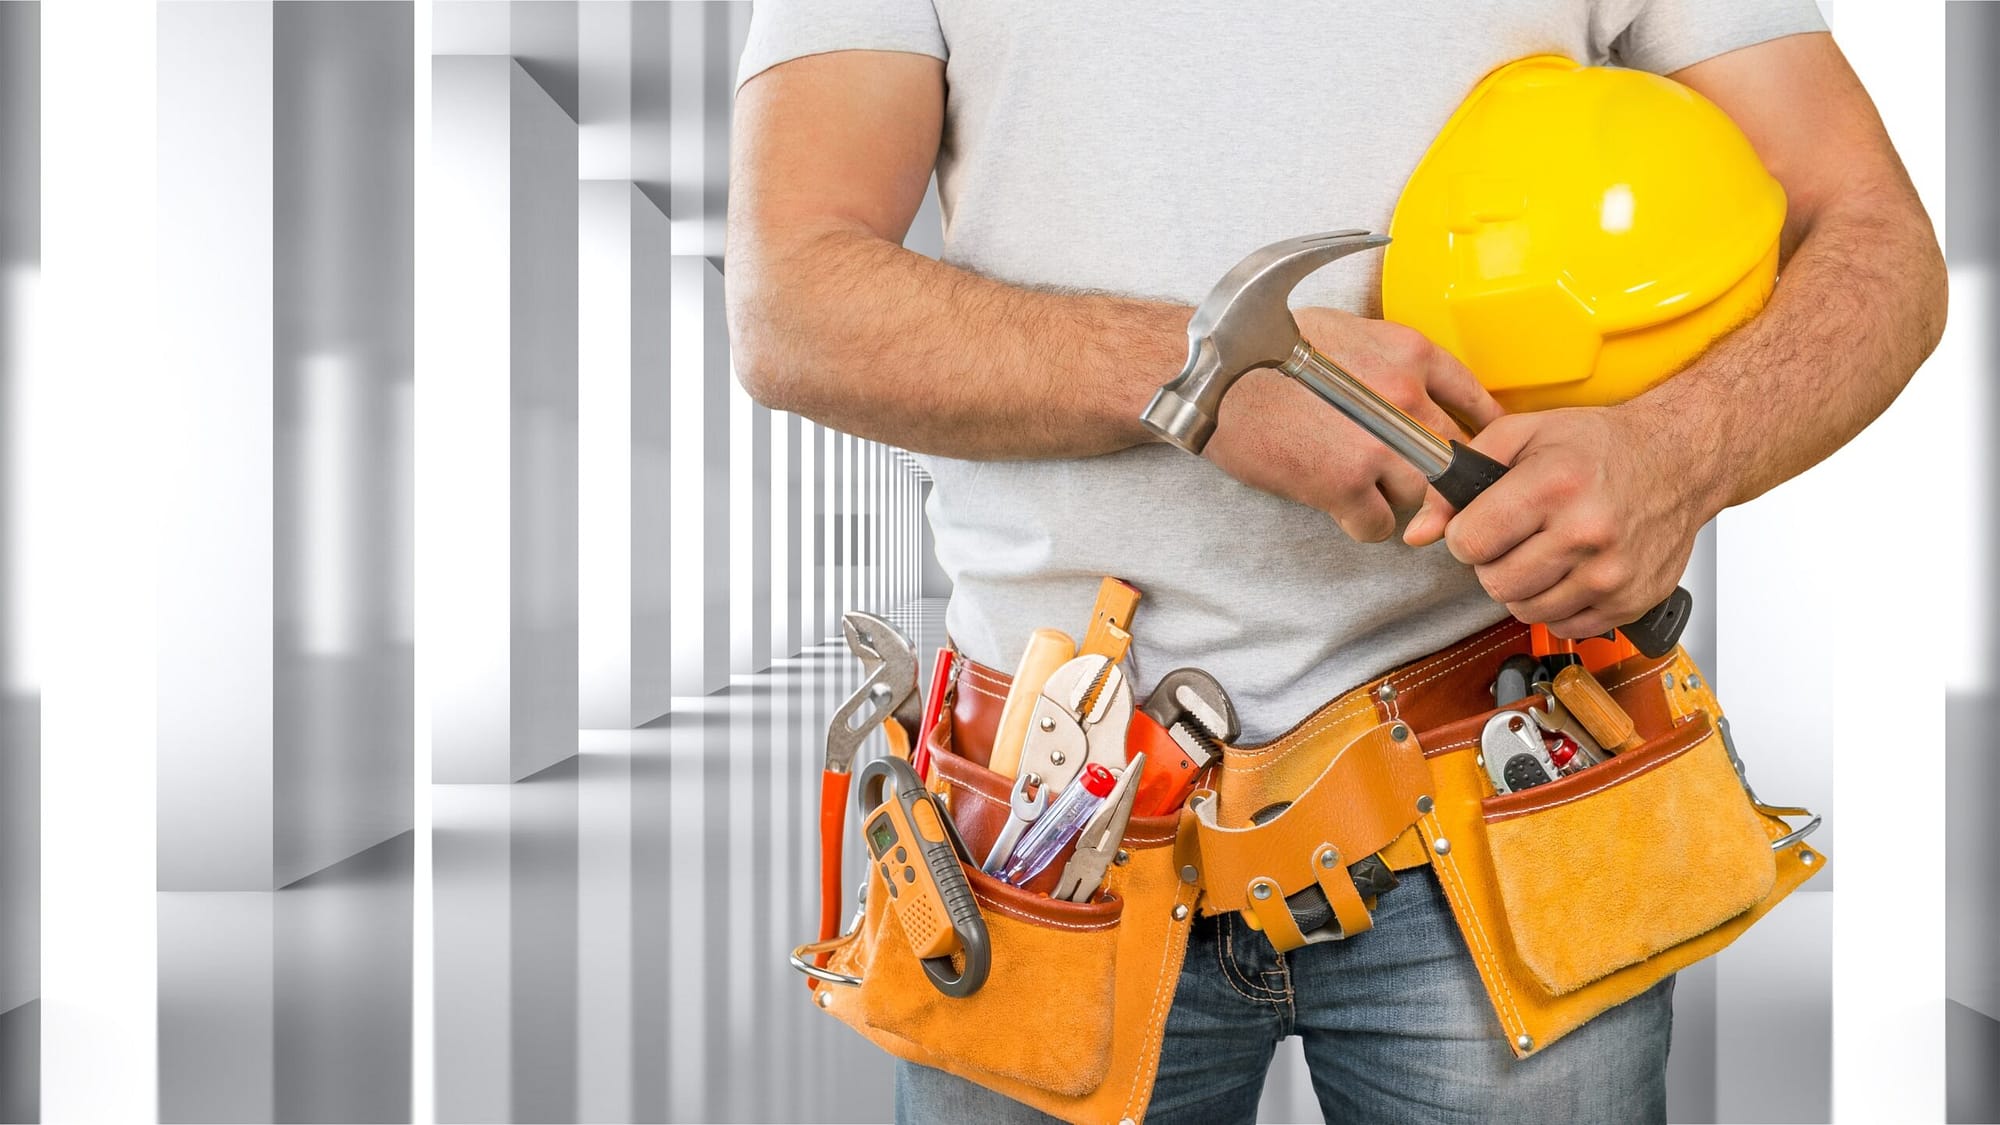 General contractor license requirements